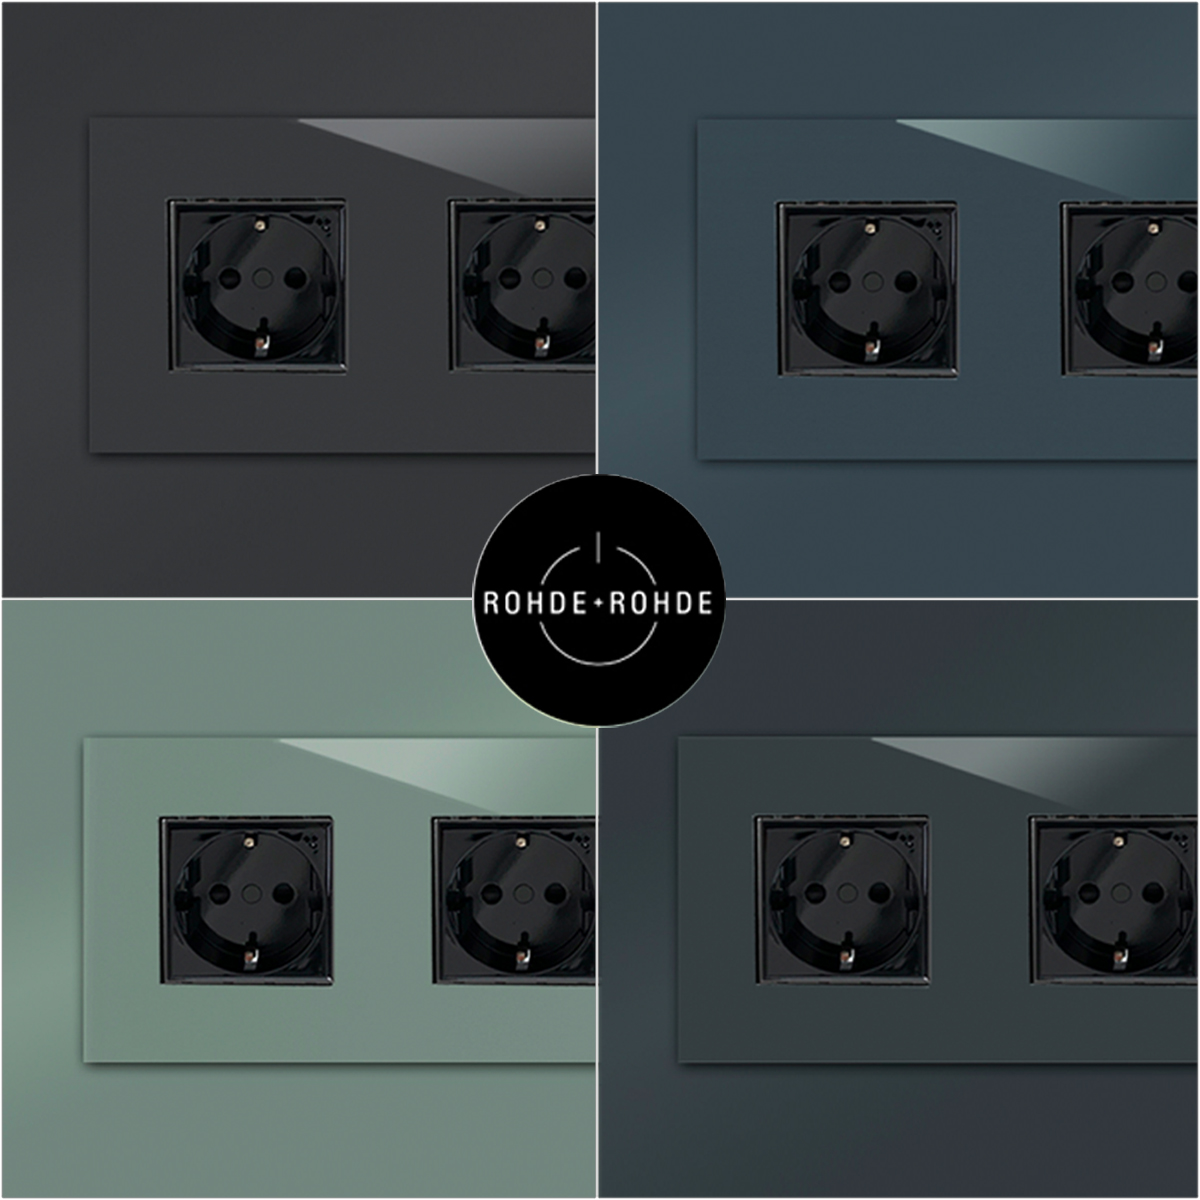 Socket outlet in Little Greene colour of choice. 3 black socket outlet inserts. MAXIM